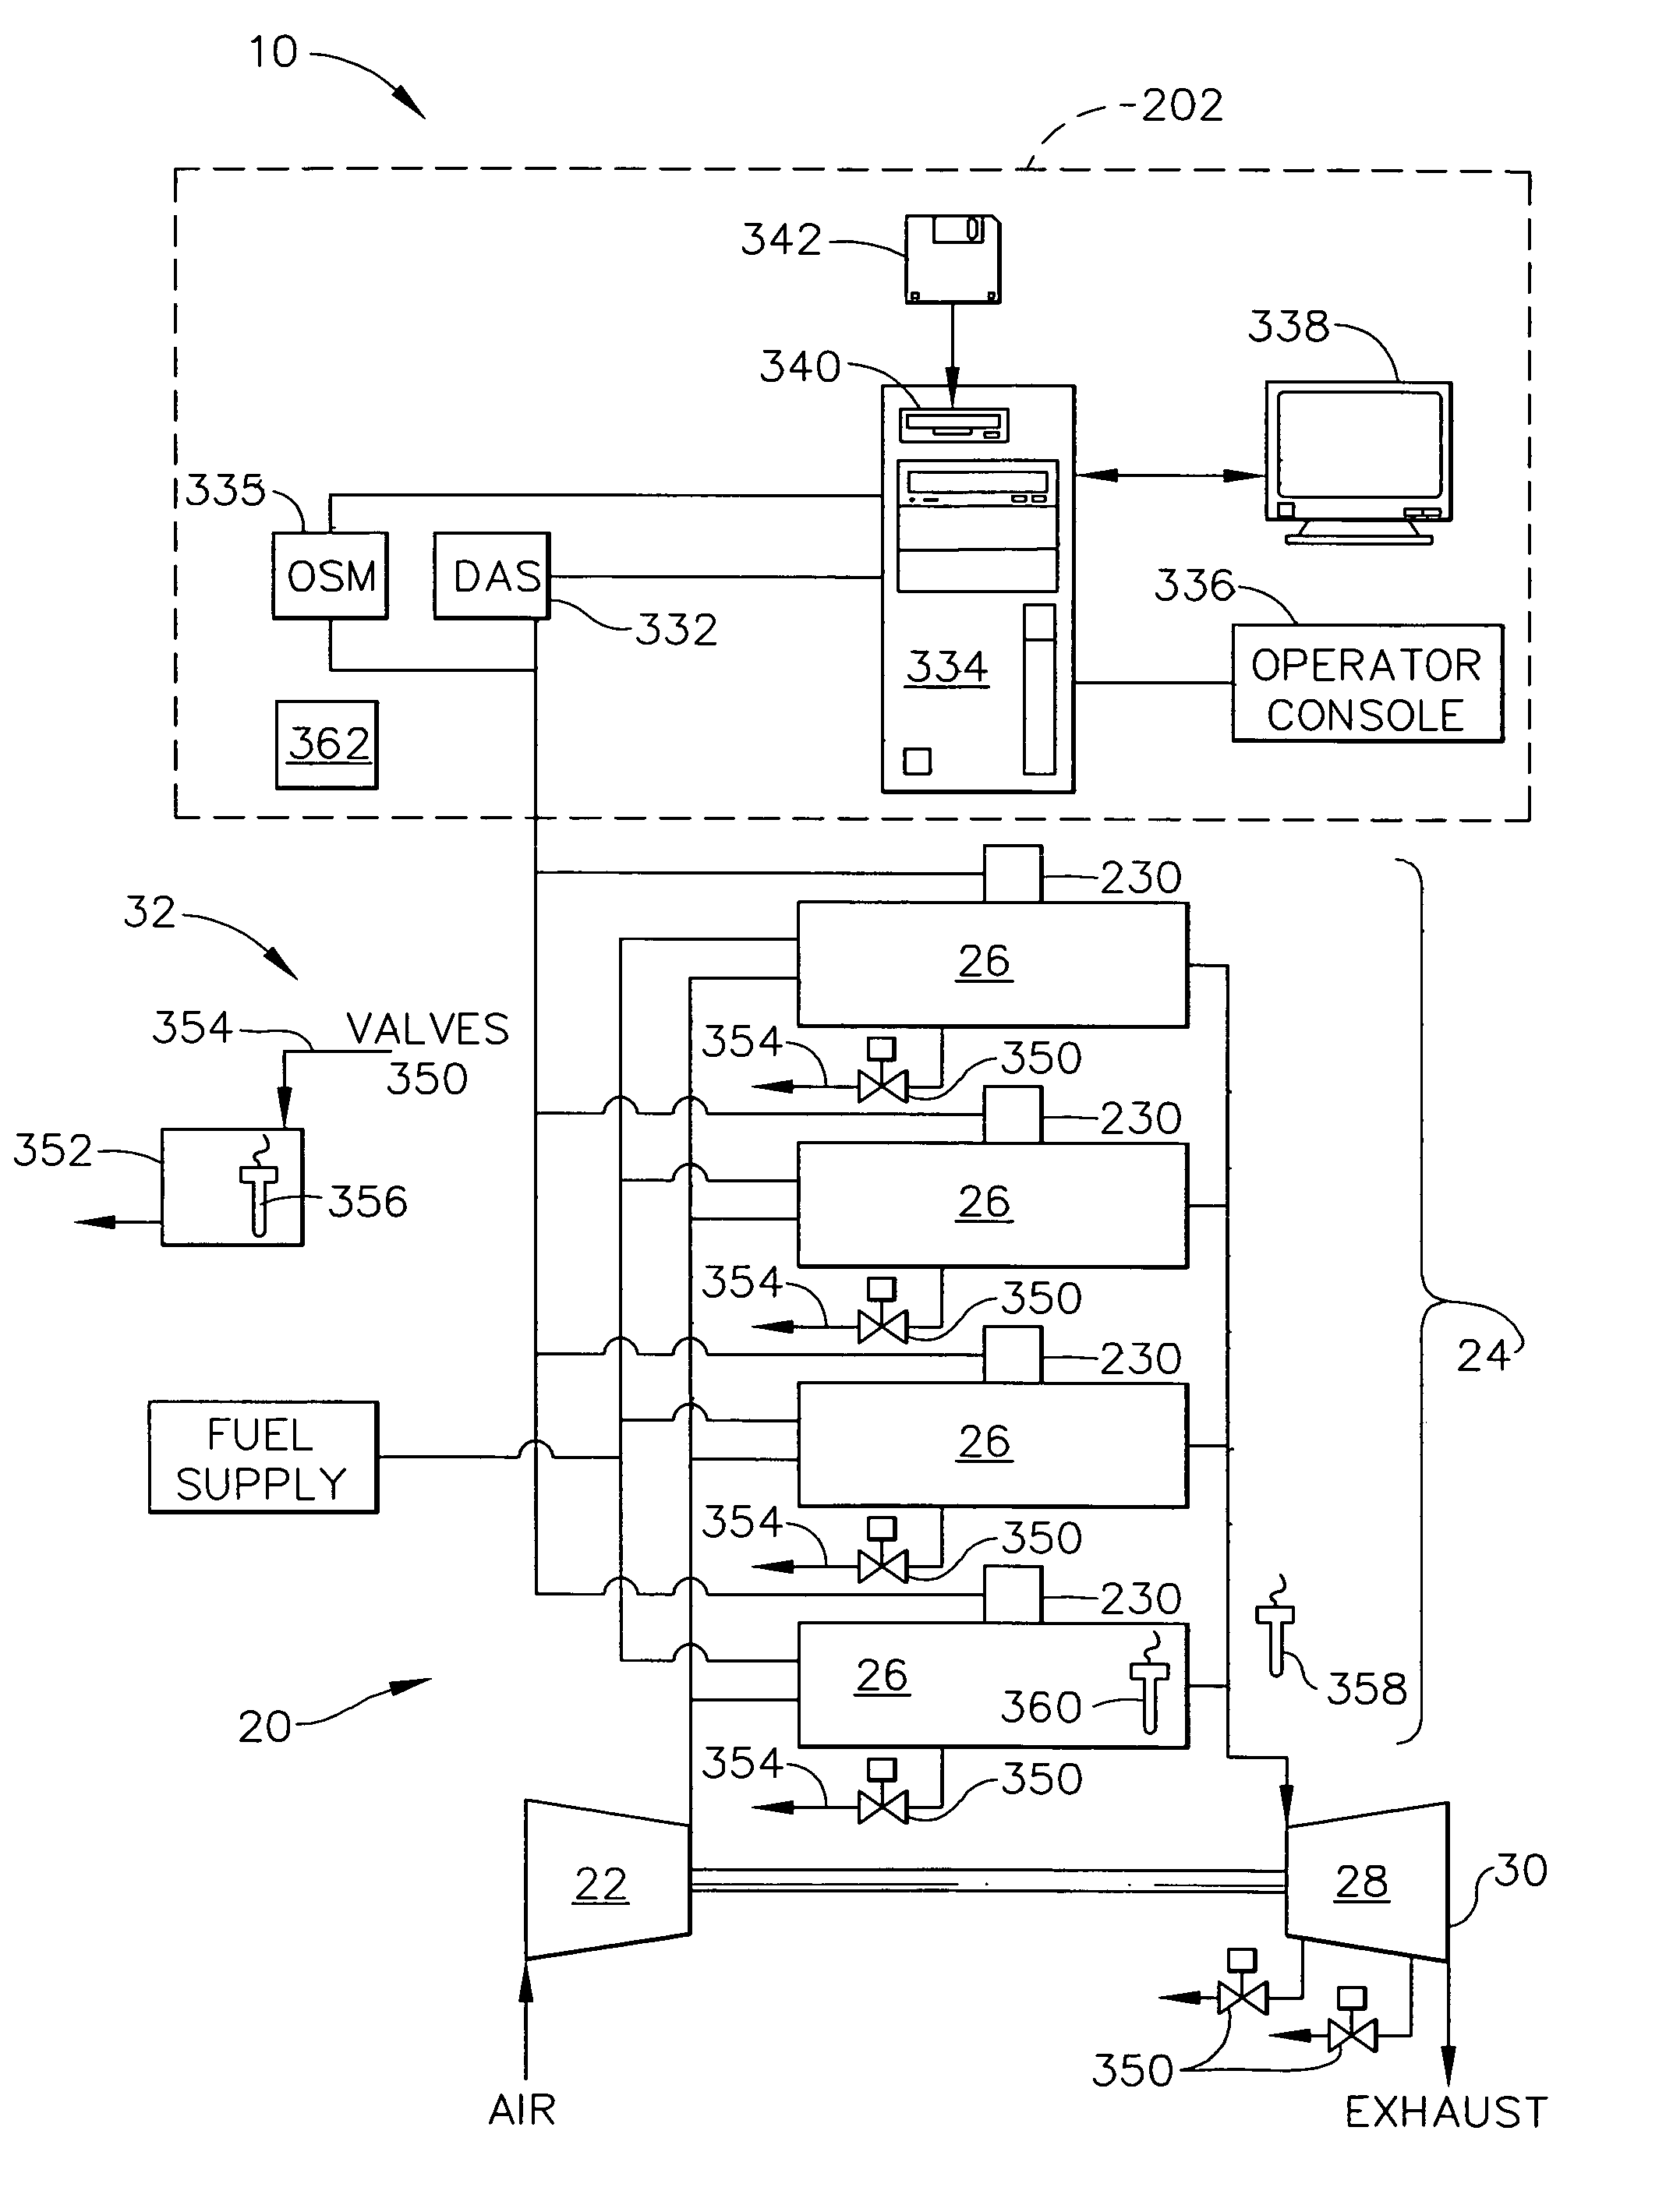 Method and system for detecting ignition failure in a gas turbine engine